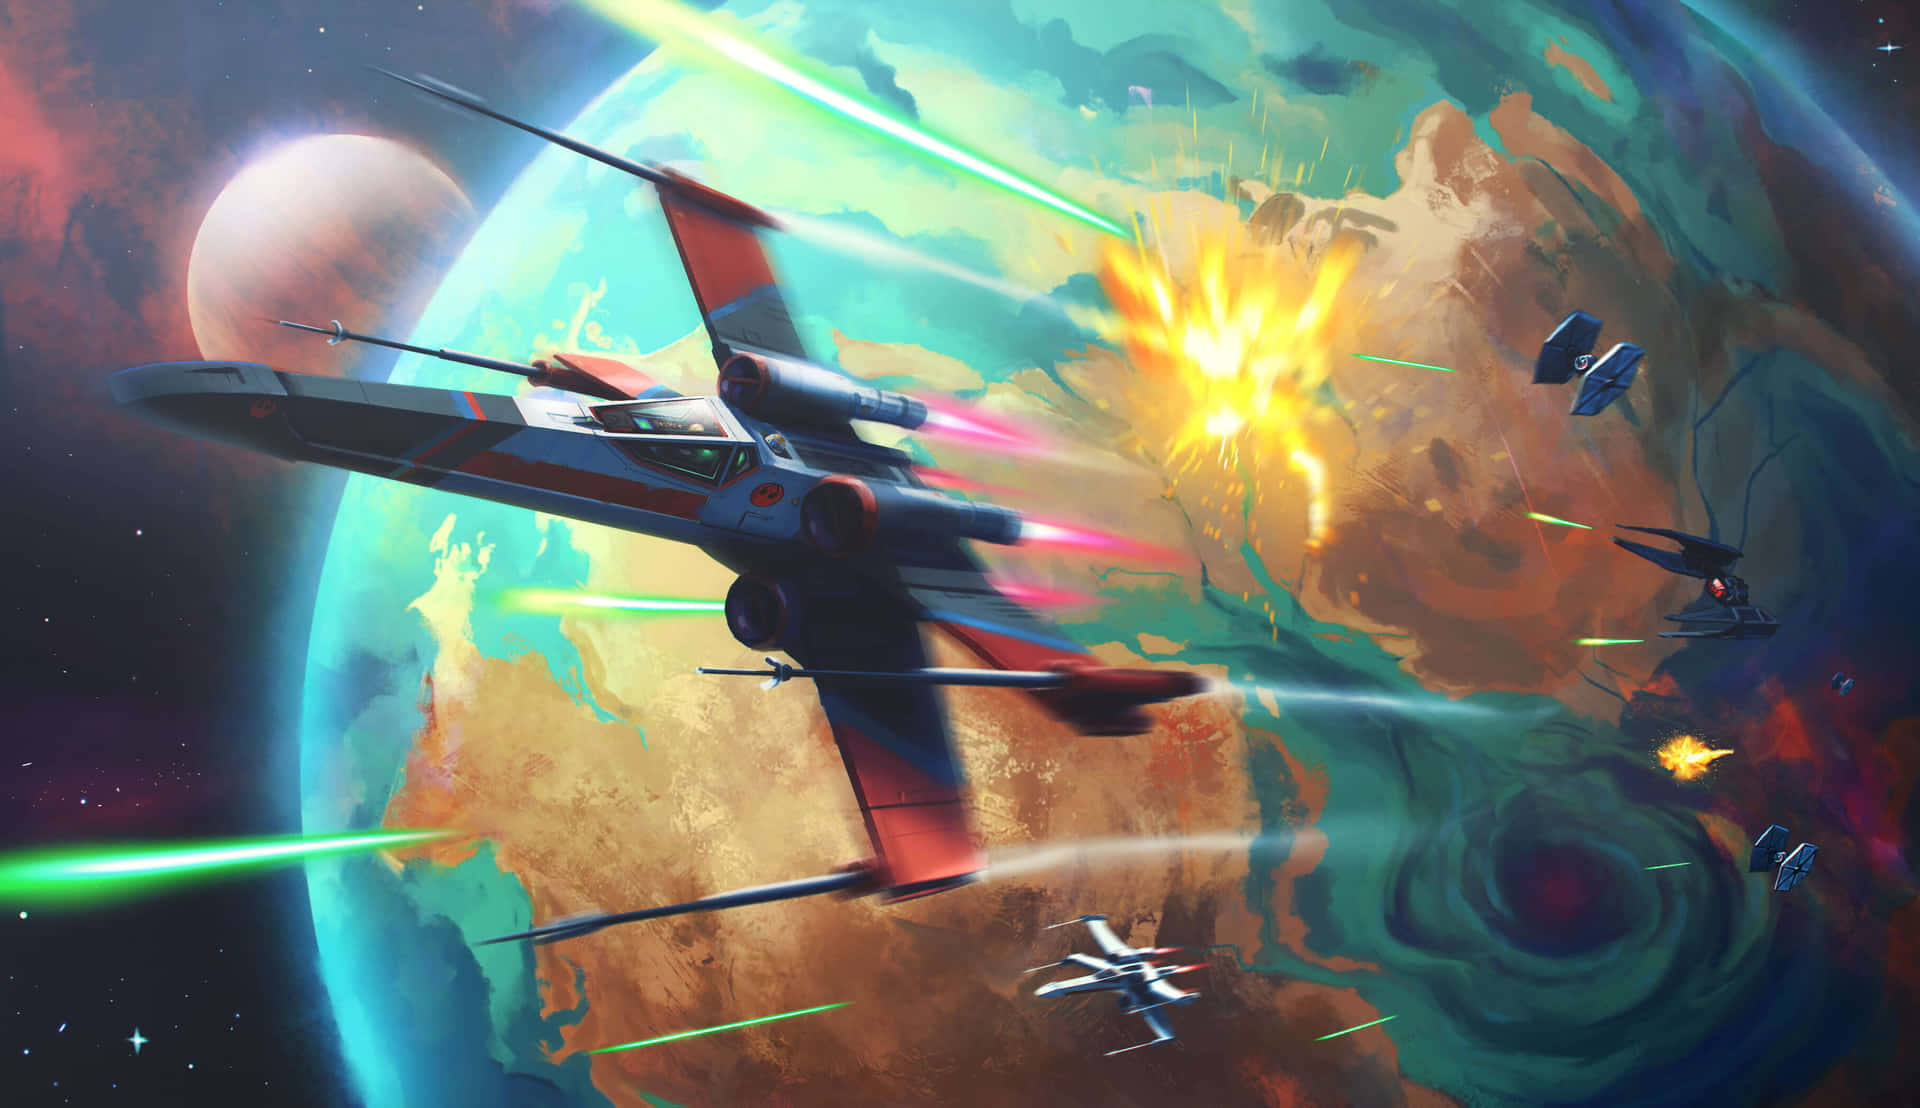 Resistance X-wing Fighter Soaring Through the Clouds Wallpaper